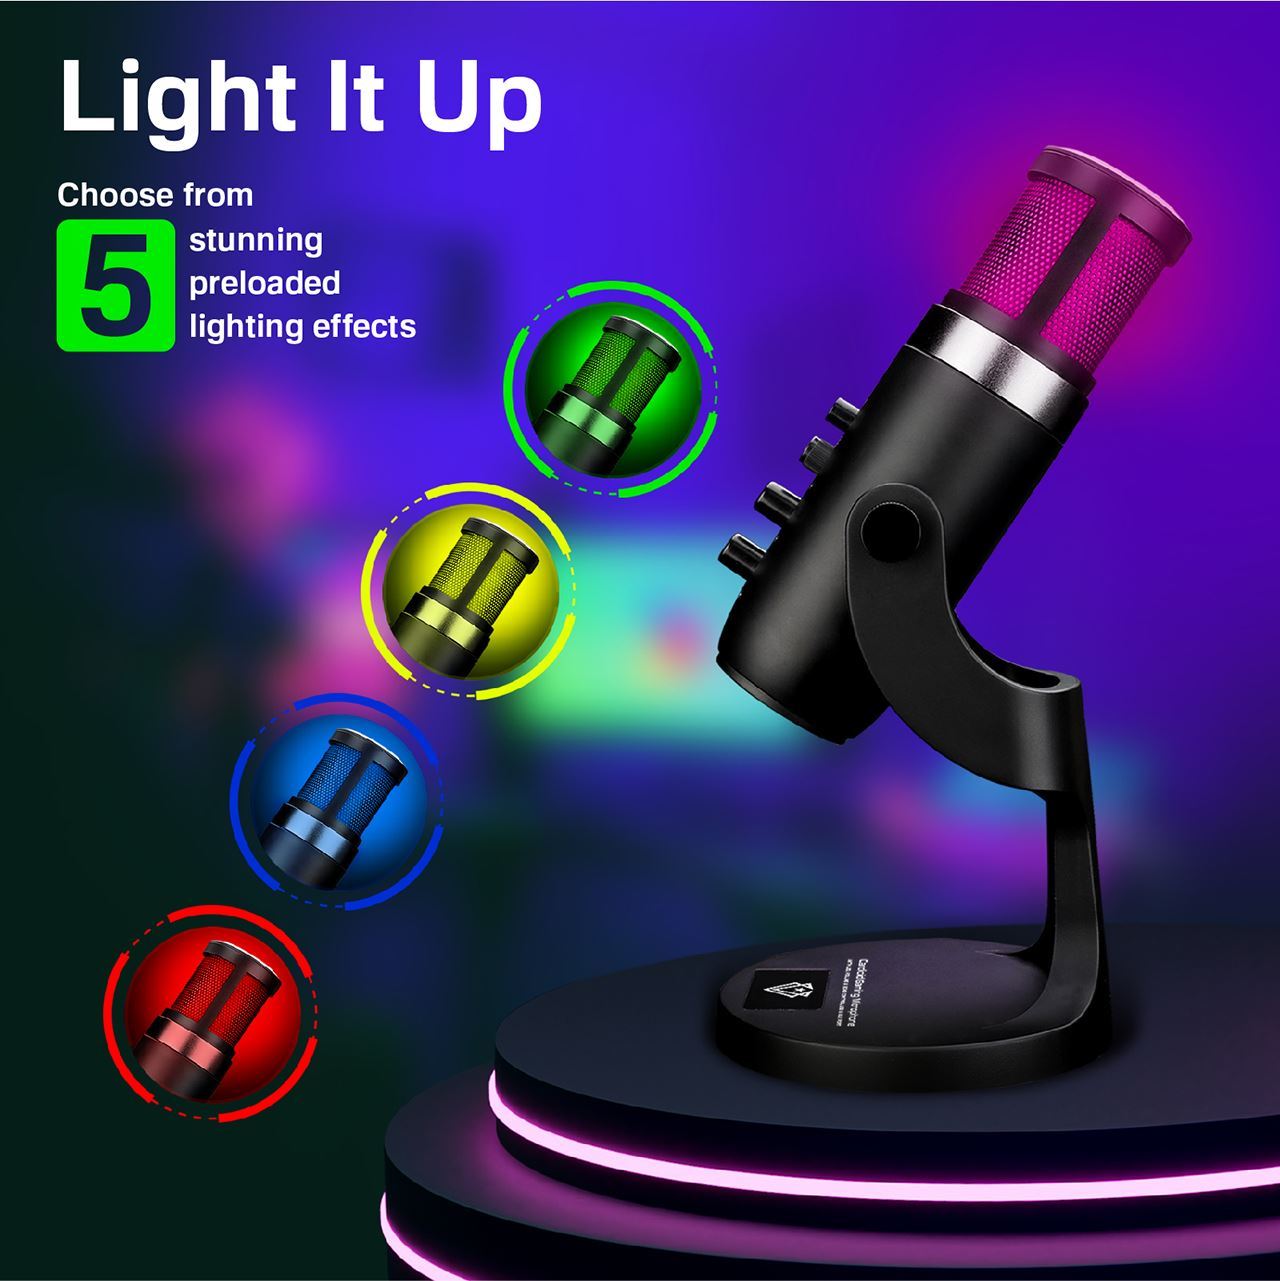 VERTUX_Cardioid_Gaming_Microphone_with_5_Mode_RGB_LED_Light._One_Touch_Mute,_USB-C_Input._Adjustable_Angle._Plug_and_Play,_Anti_Vibration_Damper_Stand._1.8_Cable_Length